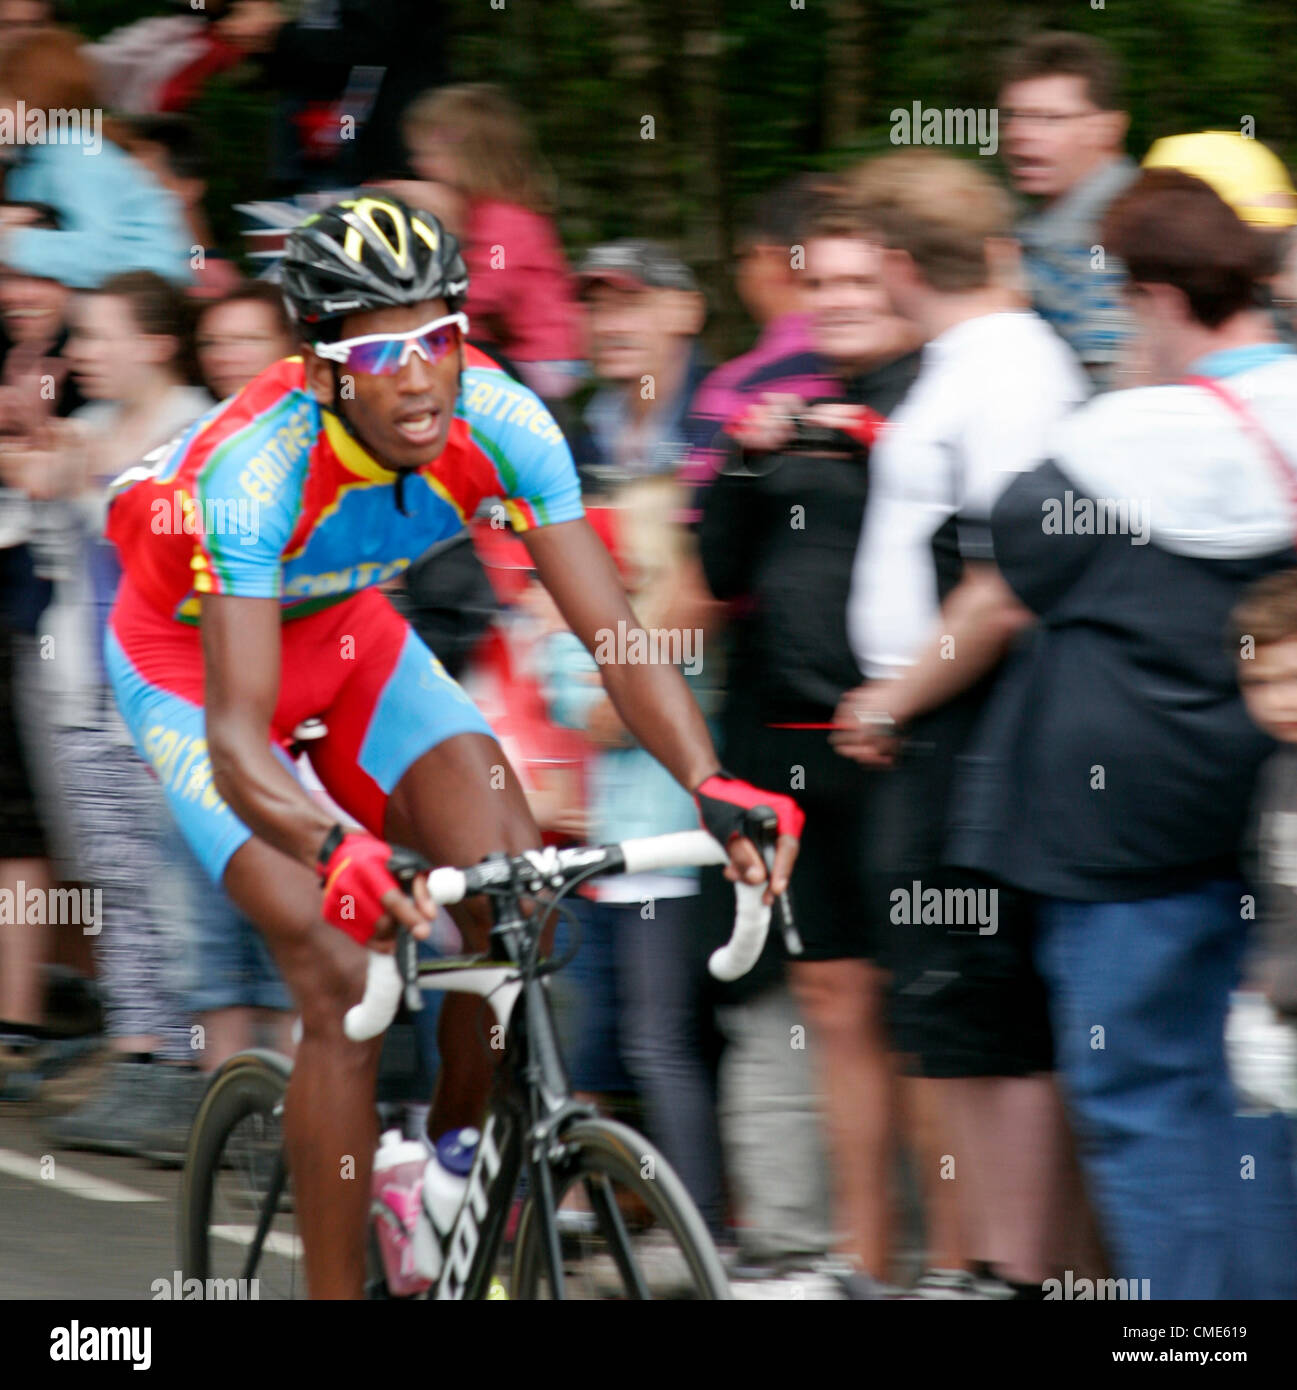 Eritrean cyclist Daniel Teklehaimanot taking part in the Olympic road race on box hill in Surrey which was attended by massive crowds who were cheering them on the 28th July 2012 aiming to win gold Stock Photo